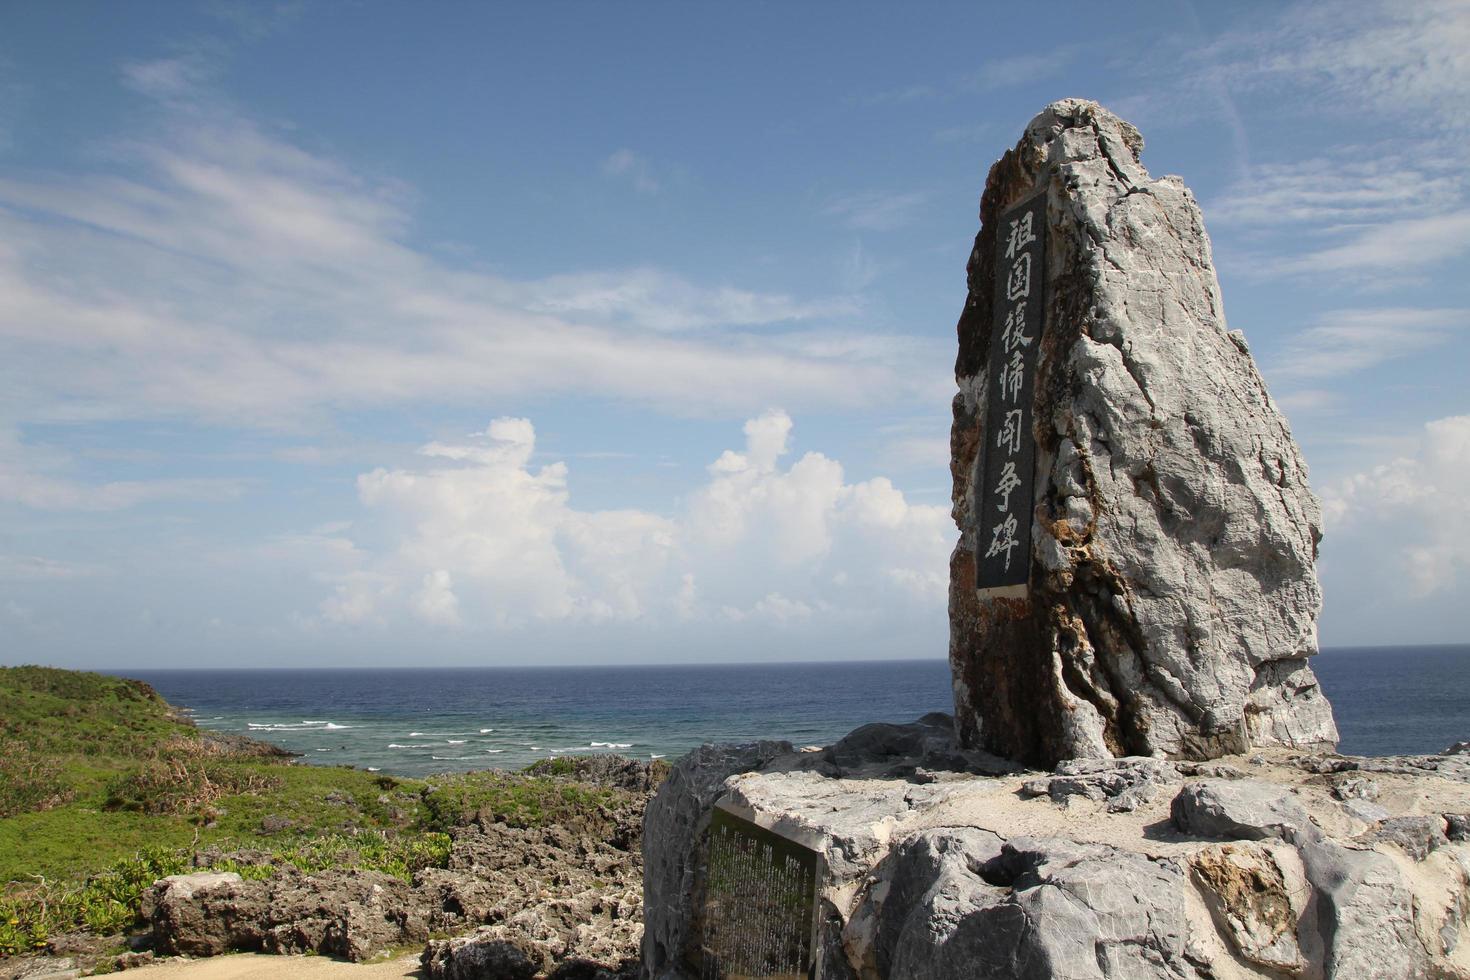 A monument at Okinawa in summer photo